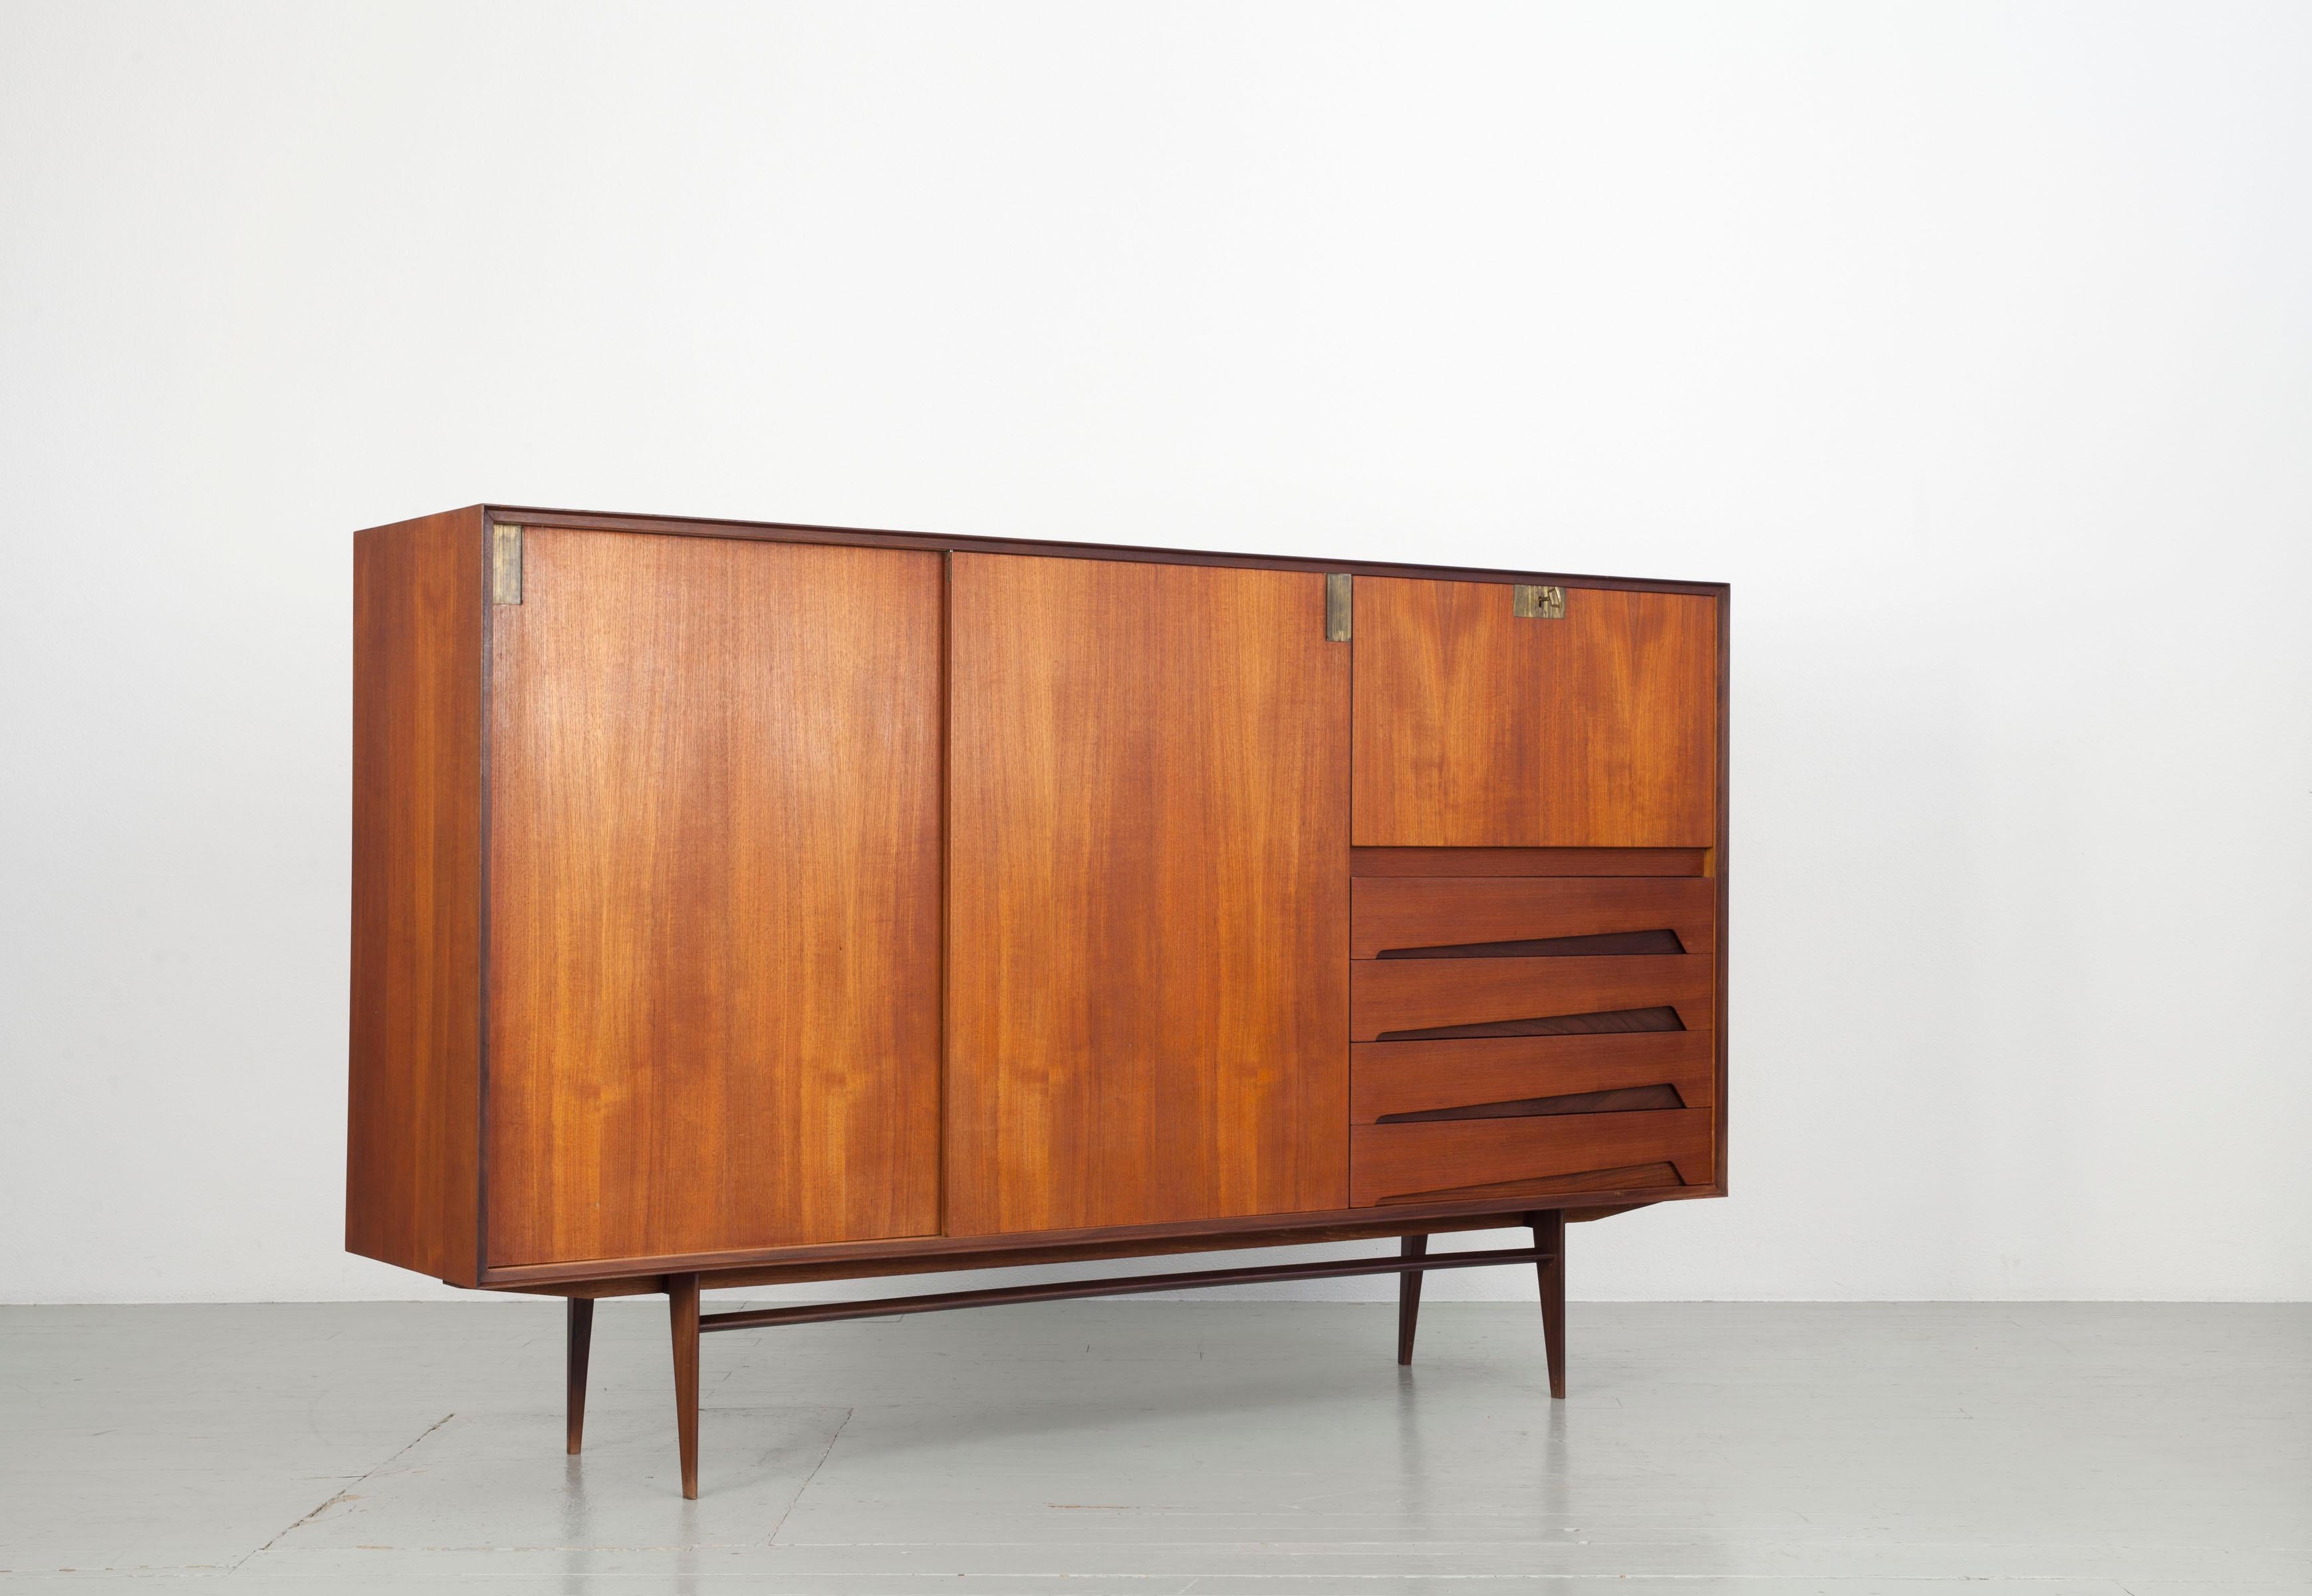 This sideboard is made of teak and finished with brass details. It can also be used as a secretary through the door on the right side of the closet. The versatile sideboard offers plenty of storage space.

Edmondo Palutari worked in-house at Dassi